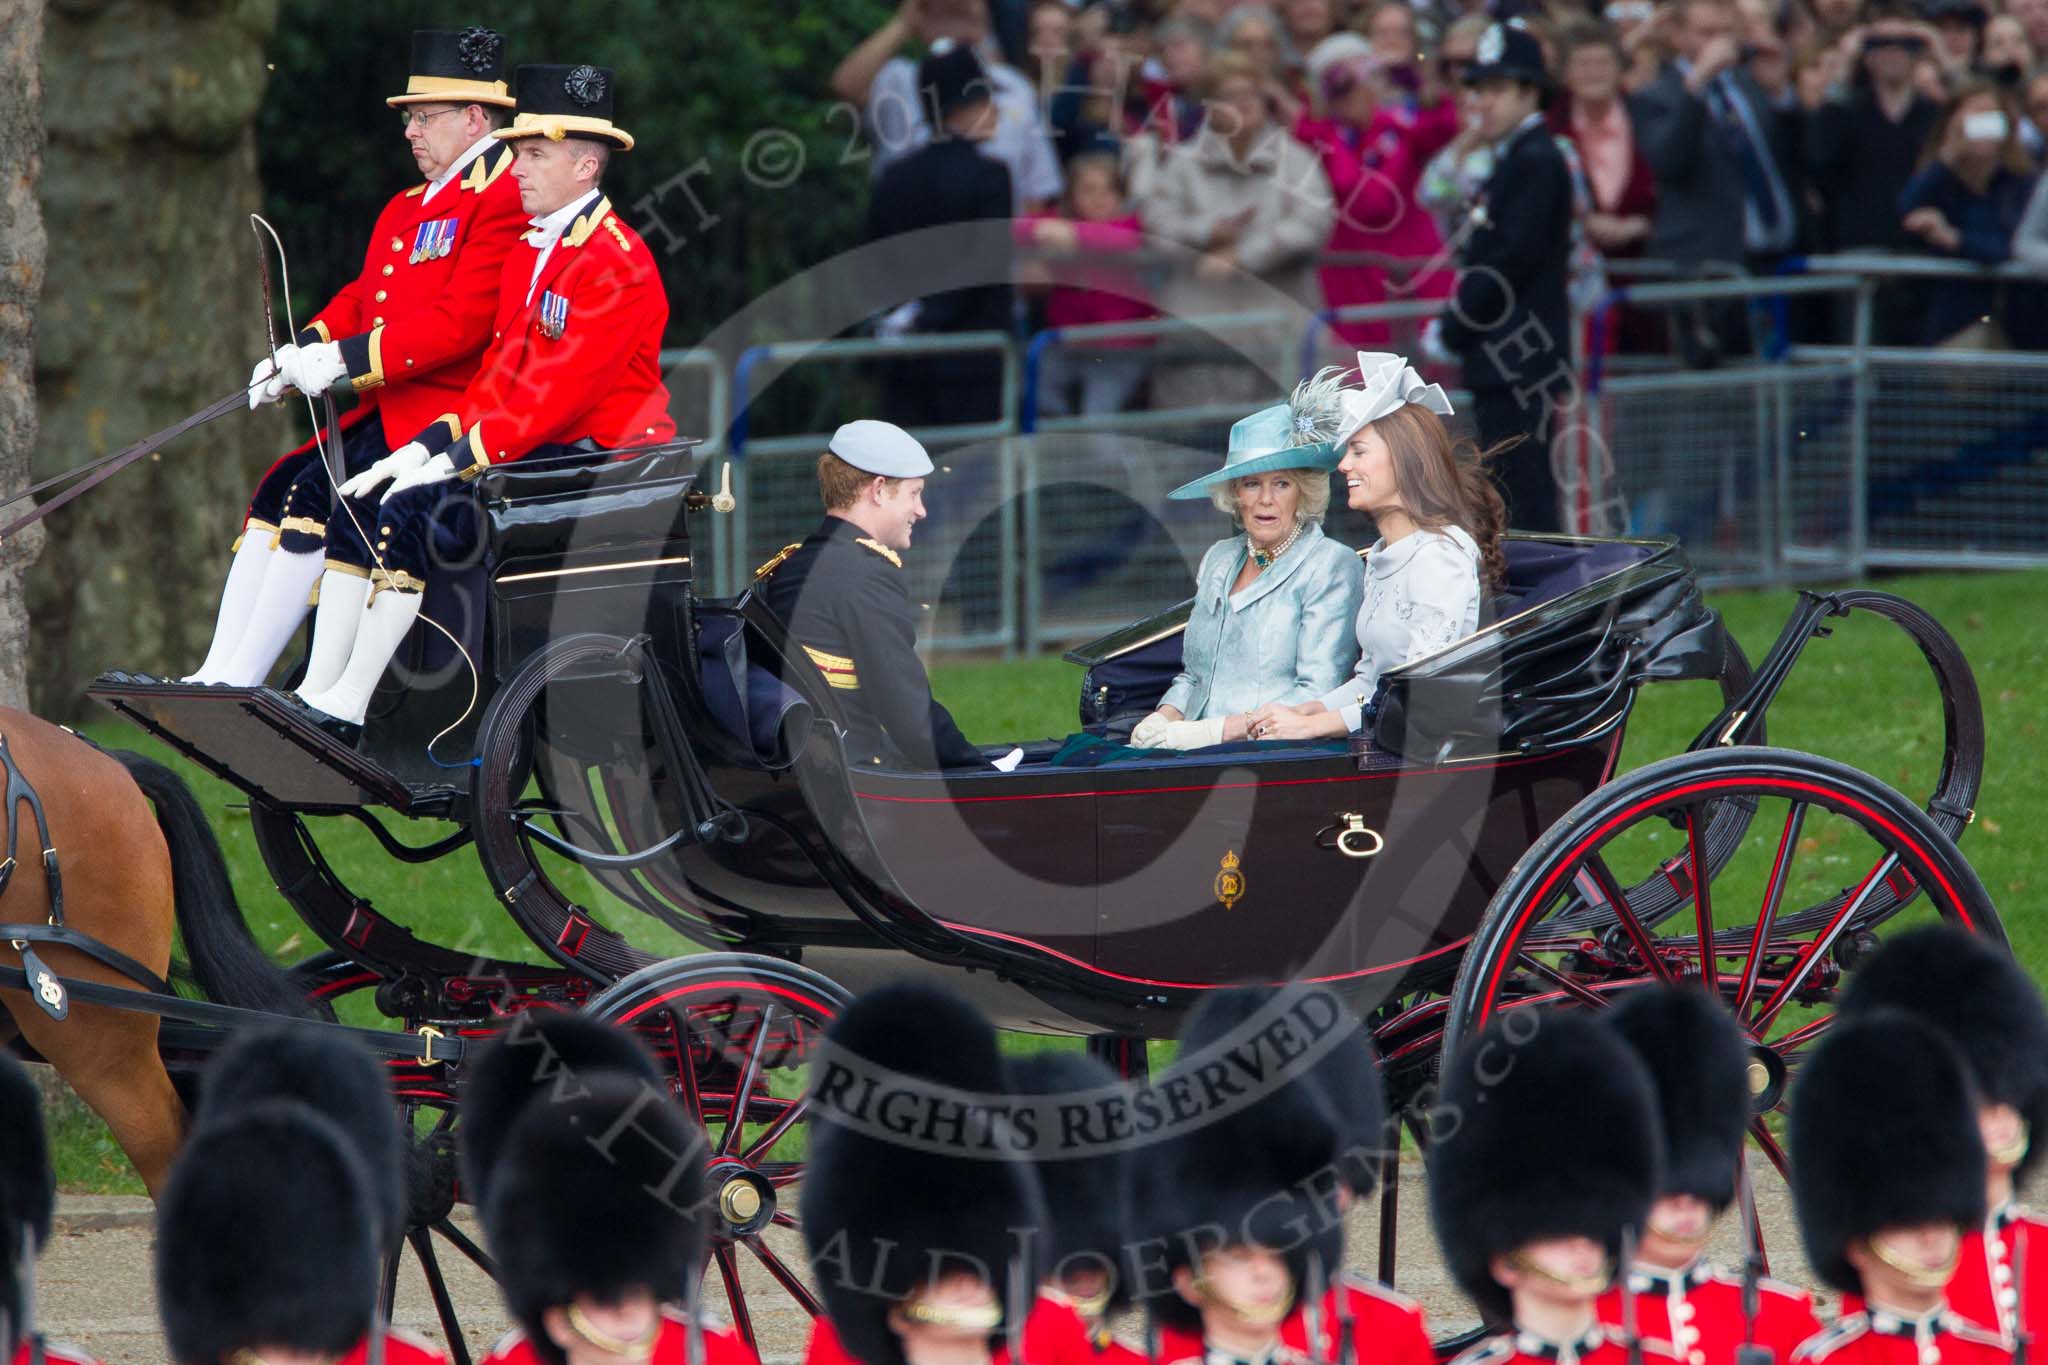 Trooping the Colour 2012: Prince Harry, the Ducess of Cornwall, and the Duchess of Cambridge in the first carriage..
Horse Guards Parade, Westminster,
London SW1,

United Kingdom,
on 16 June 2012 at 10:50, image #115